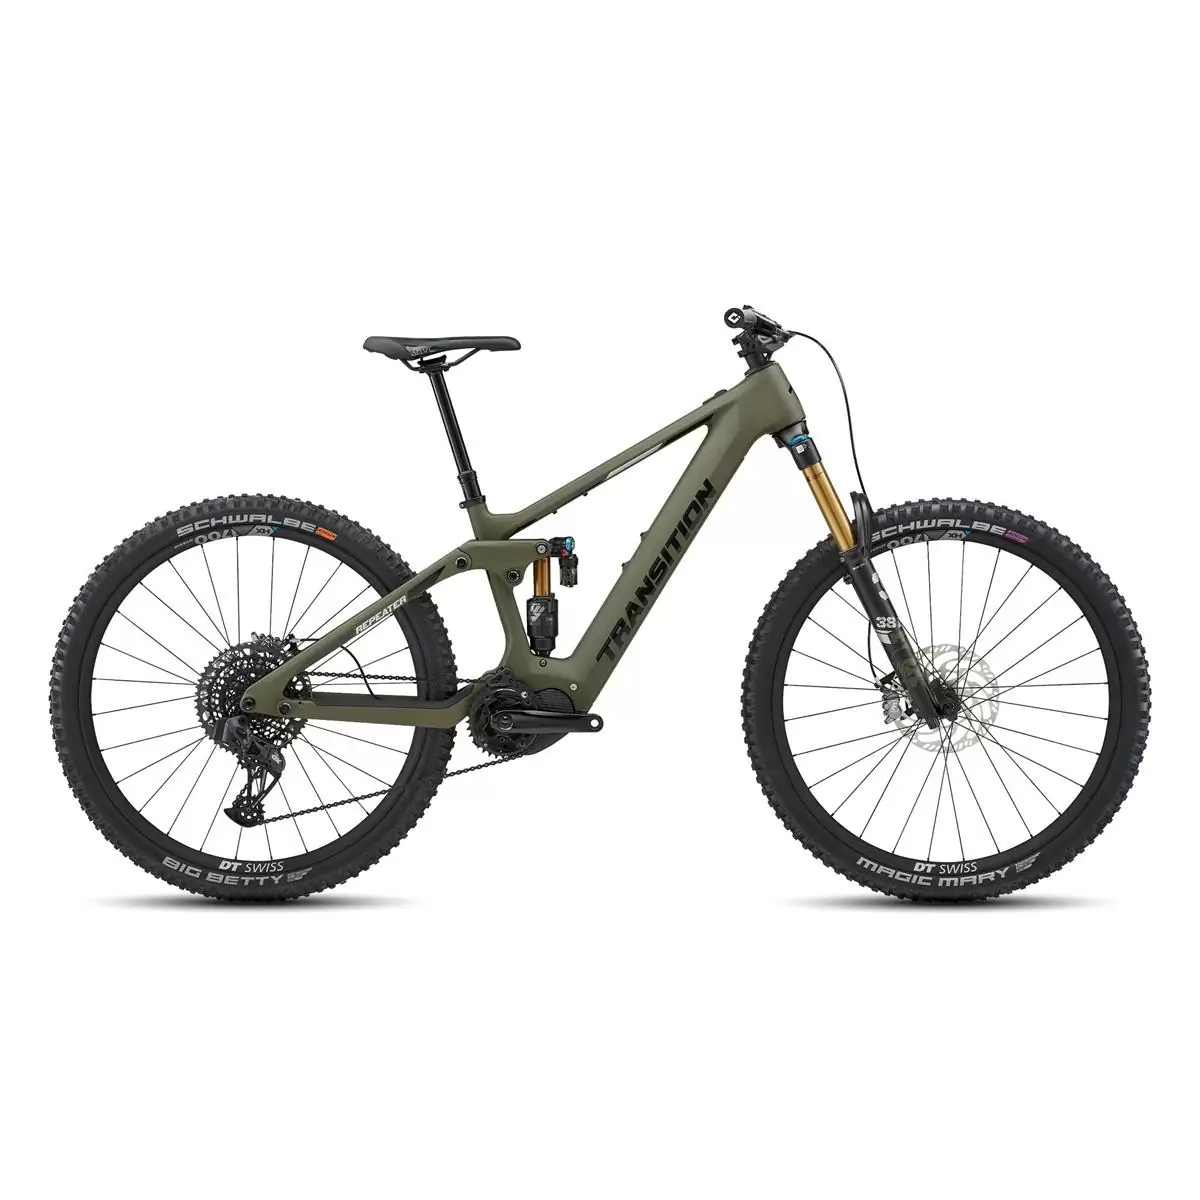 Repeater Carbon AXS 29'' 160mm 12v 630Wh Shimano EP8 Mossy Green Taglia S - image